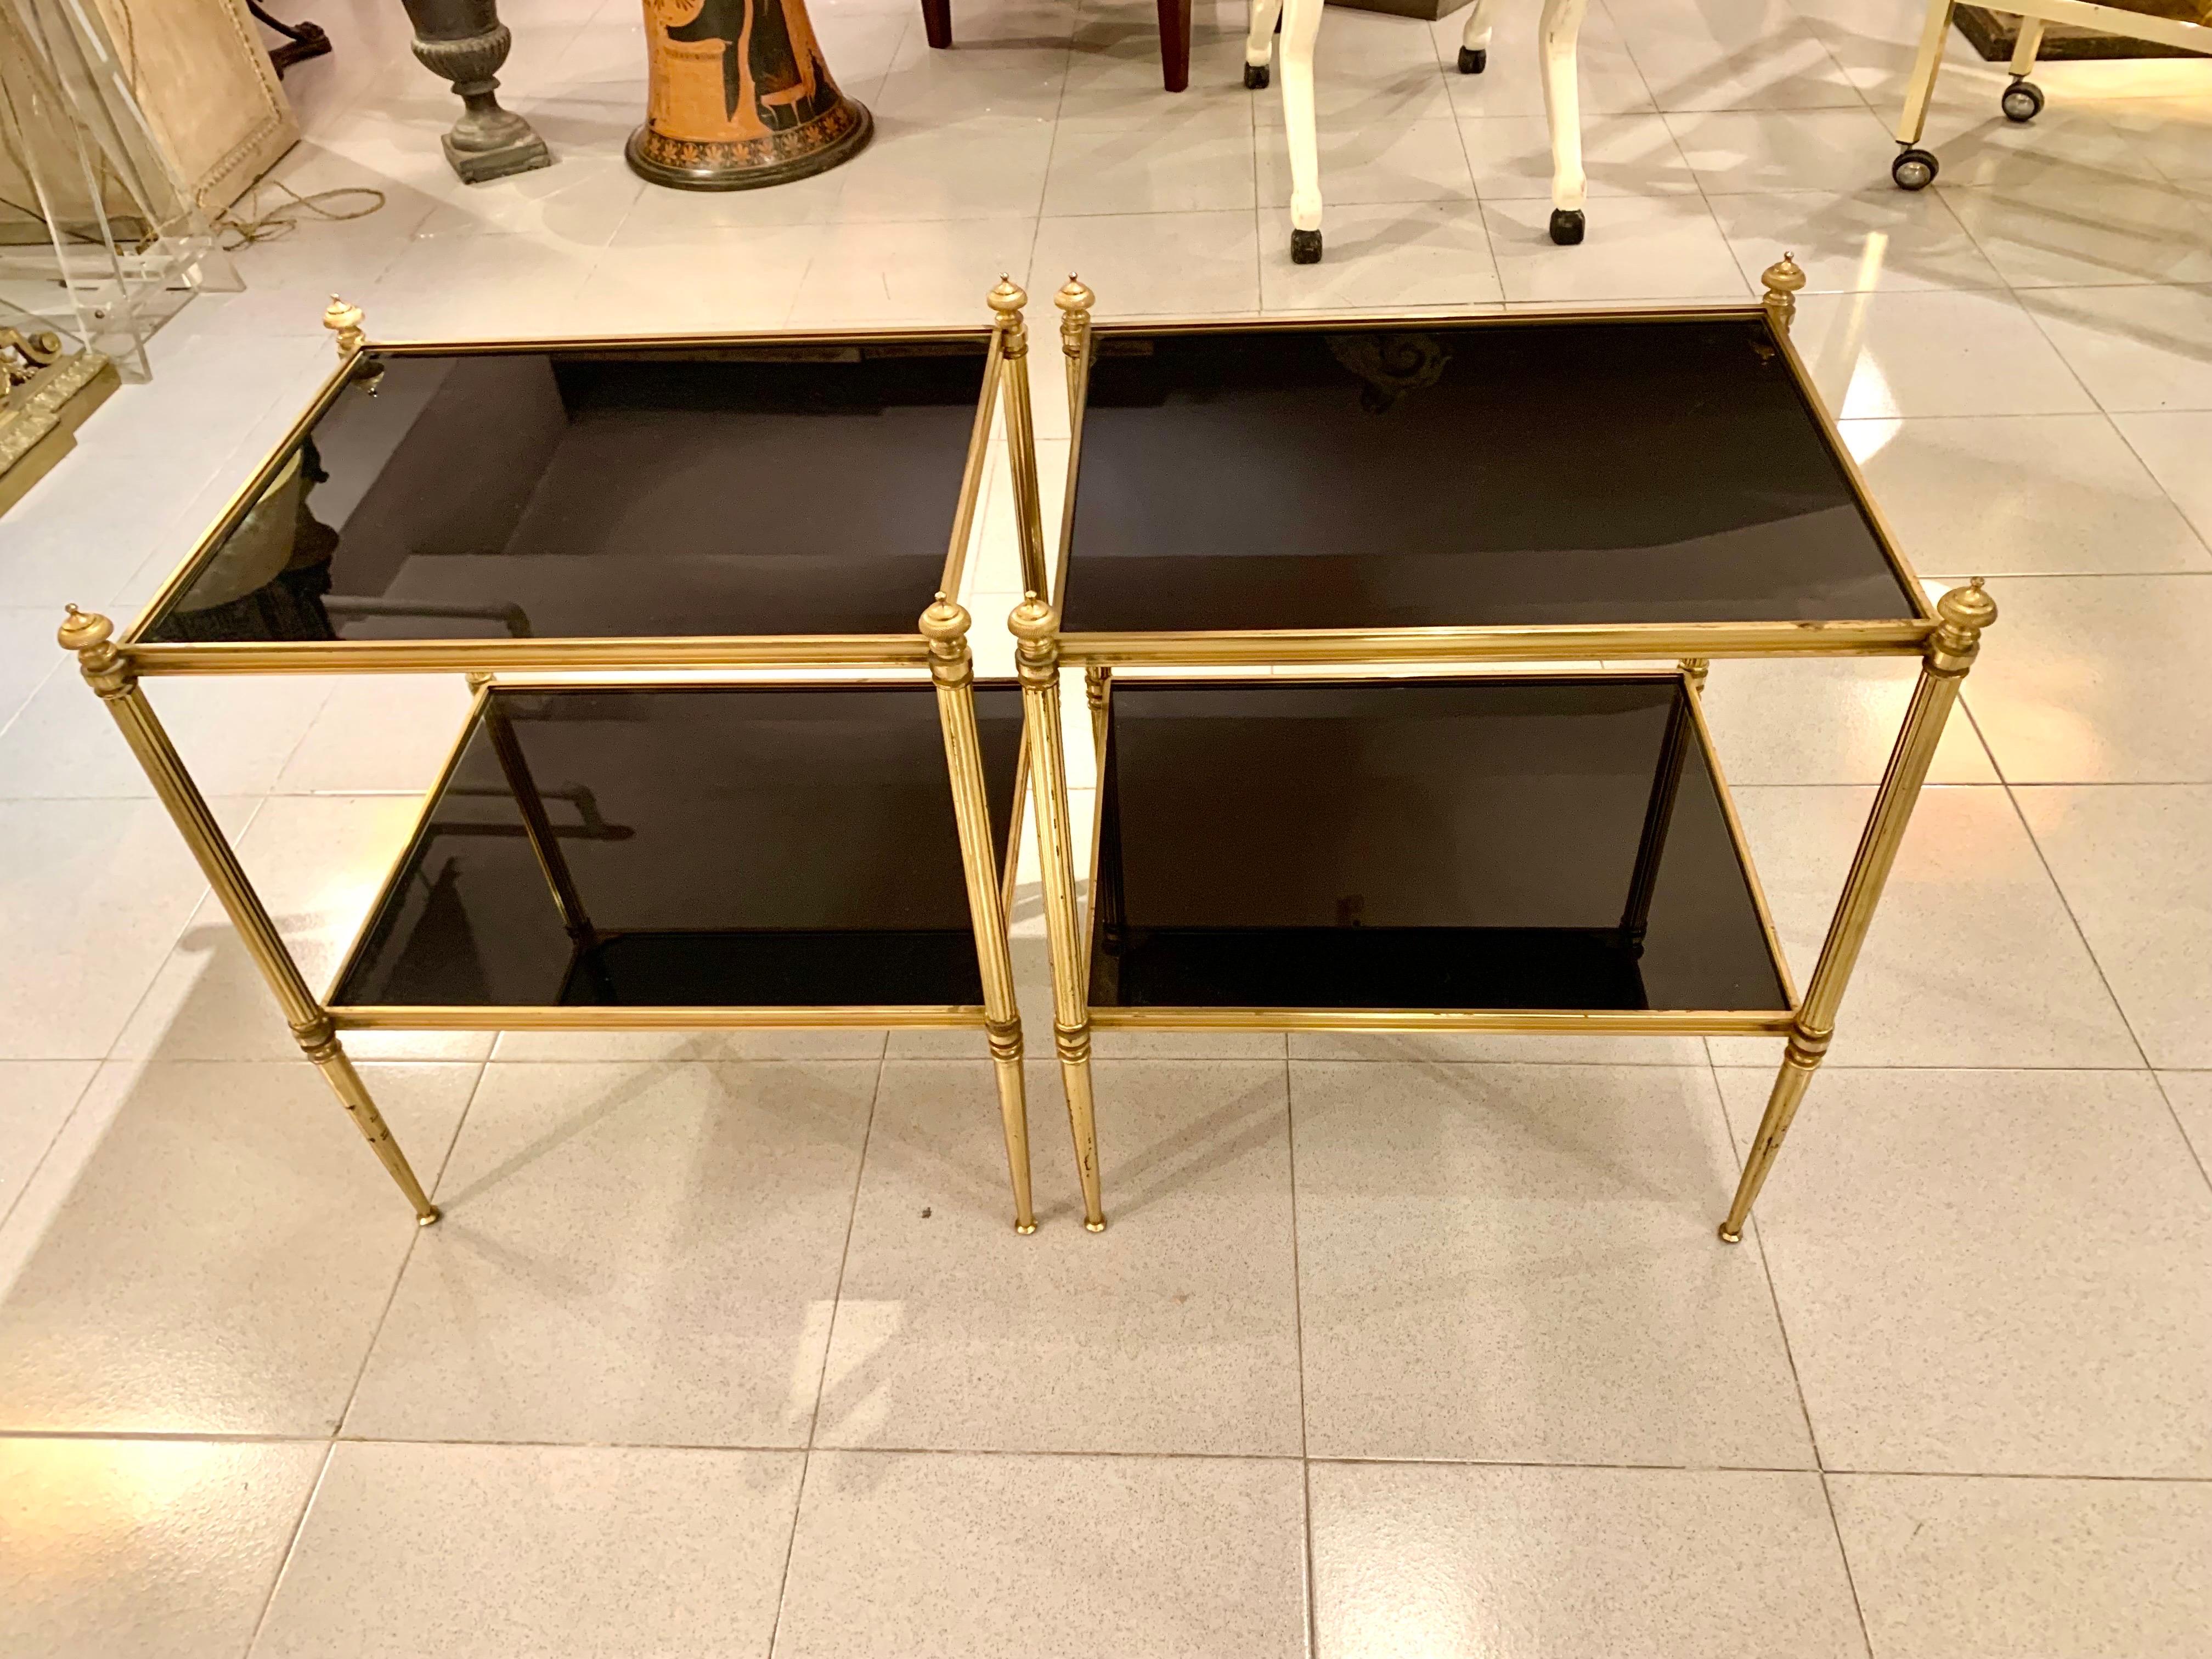 A pair of French Maison Jansen-style tables based on the Louis Xvi model, in gilded brass and two trays with black glass tops are very decorative tables with various uses, in Good condition.